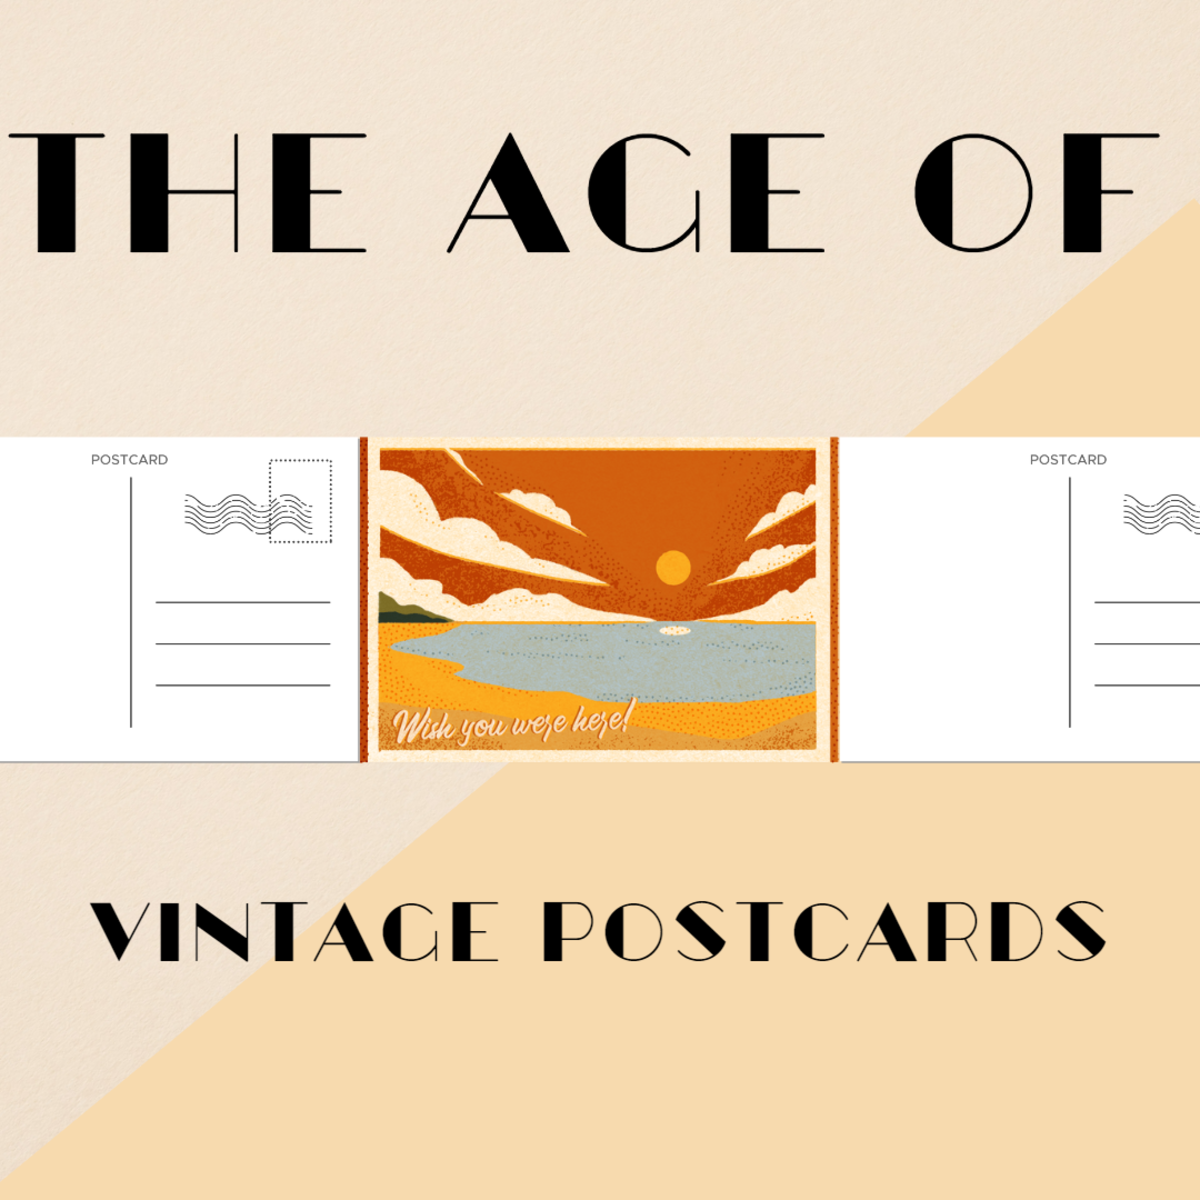 How to Estimate the Age of a Vintage Postcard